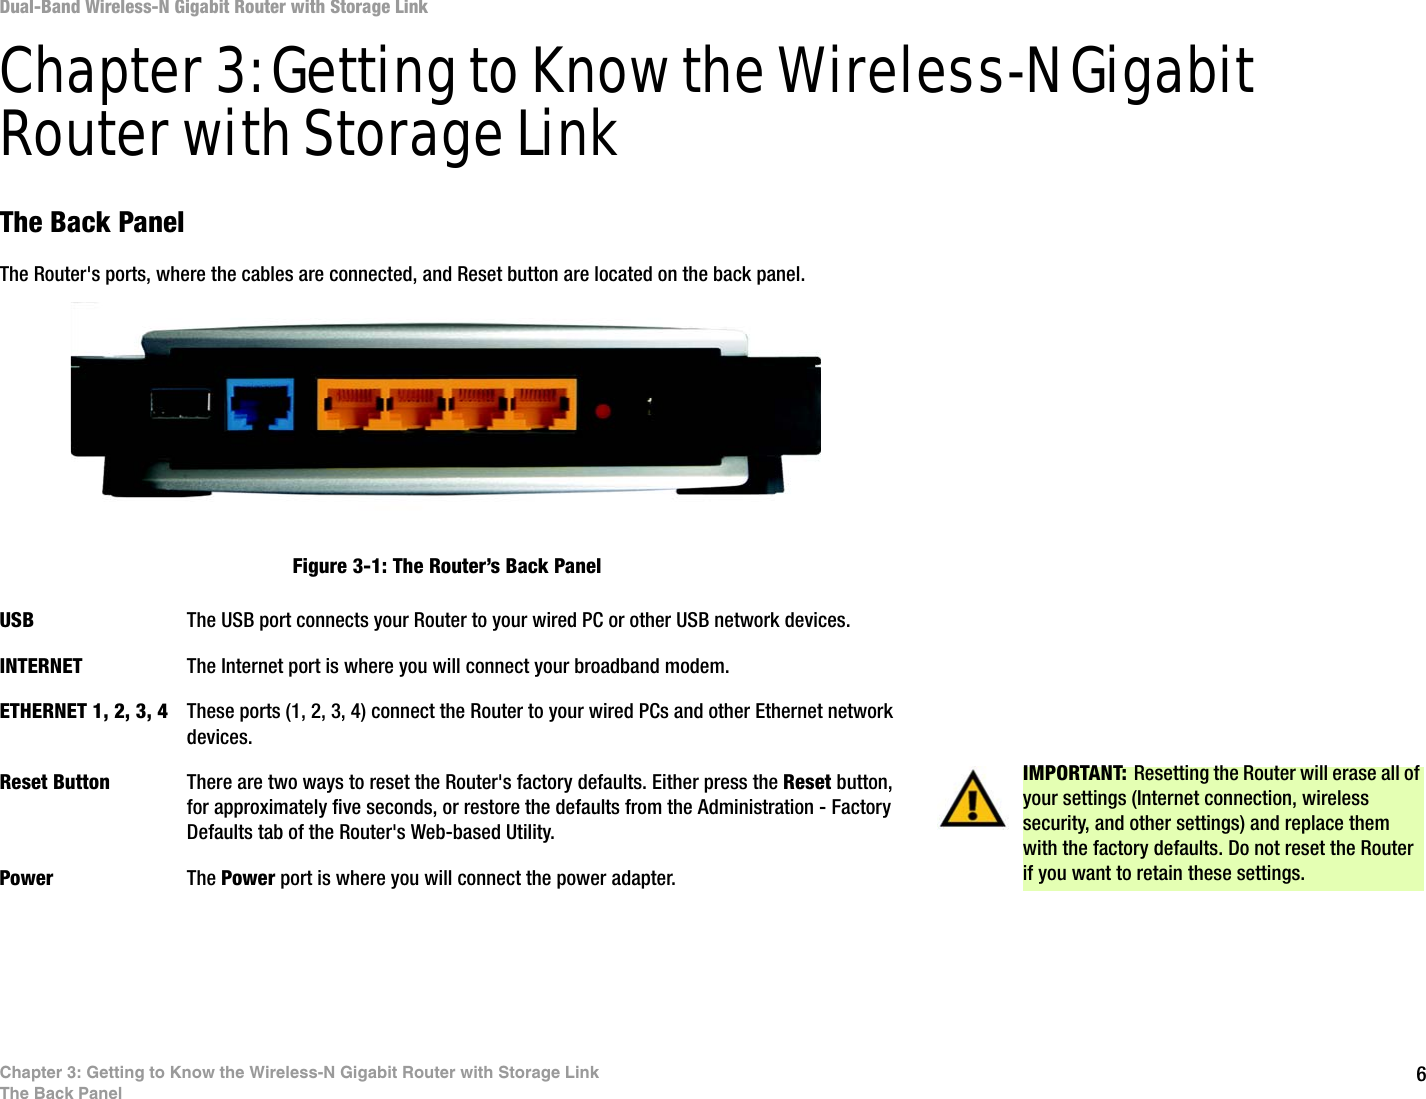 6Chapter 3: Getting to Know the Wireless-N Gigabit Router with Storage LinkThe Back PanelDual-Band Wireless-N Gigabit Router with Storage LinkChapter 3: Getting to Know the Wireless-N Gigabit Router with Storage LinkThe Back PanelThe Router&apos;s ports, where the cables are connected, and Reset button are located on the back panel.USB The USB port connects your Router to your wired PC or other USB network devices. INTERNET The Internet port is where you will connect your broadband modem.ETHERNET 1, 2, 3, 4 These ports (1, 2, 3, 4) connect the Router to your wired PCs and other Ethernet network devices.Reset Button There are two ways to reset the Router&apos;s factory defaults. Either press the Reset button, for approximately five seconds, or restore the defaults from the Administration - Factory Defaults tab of the Router&apos;s Web-based Utility.Power The Power port is where you will connect the power adapter.IMPORTANT: Resetting the Router will erase all of your settings (Internet connection, wireless security, and other settings) and replace them with the factory defaults. Do not reset the Router if you want to retain these settings.Figure 3-1: The Router’s Back Panel